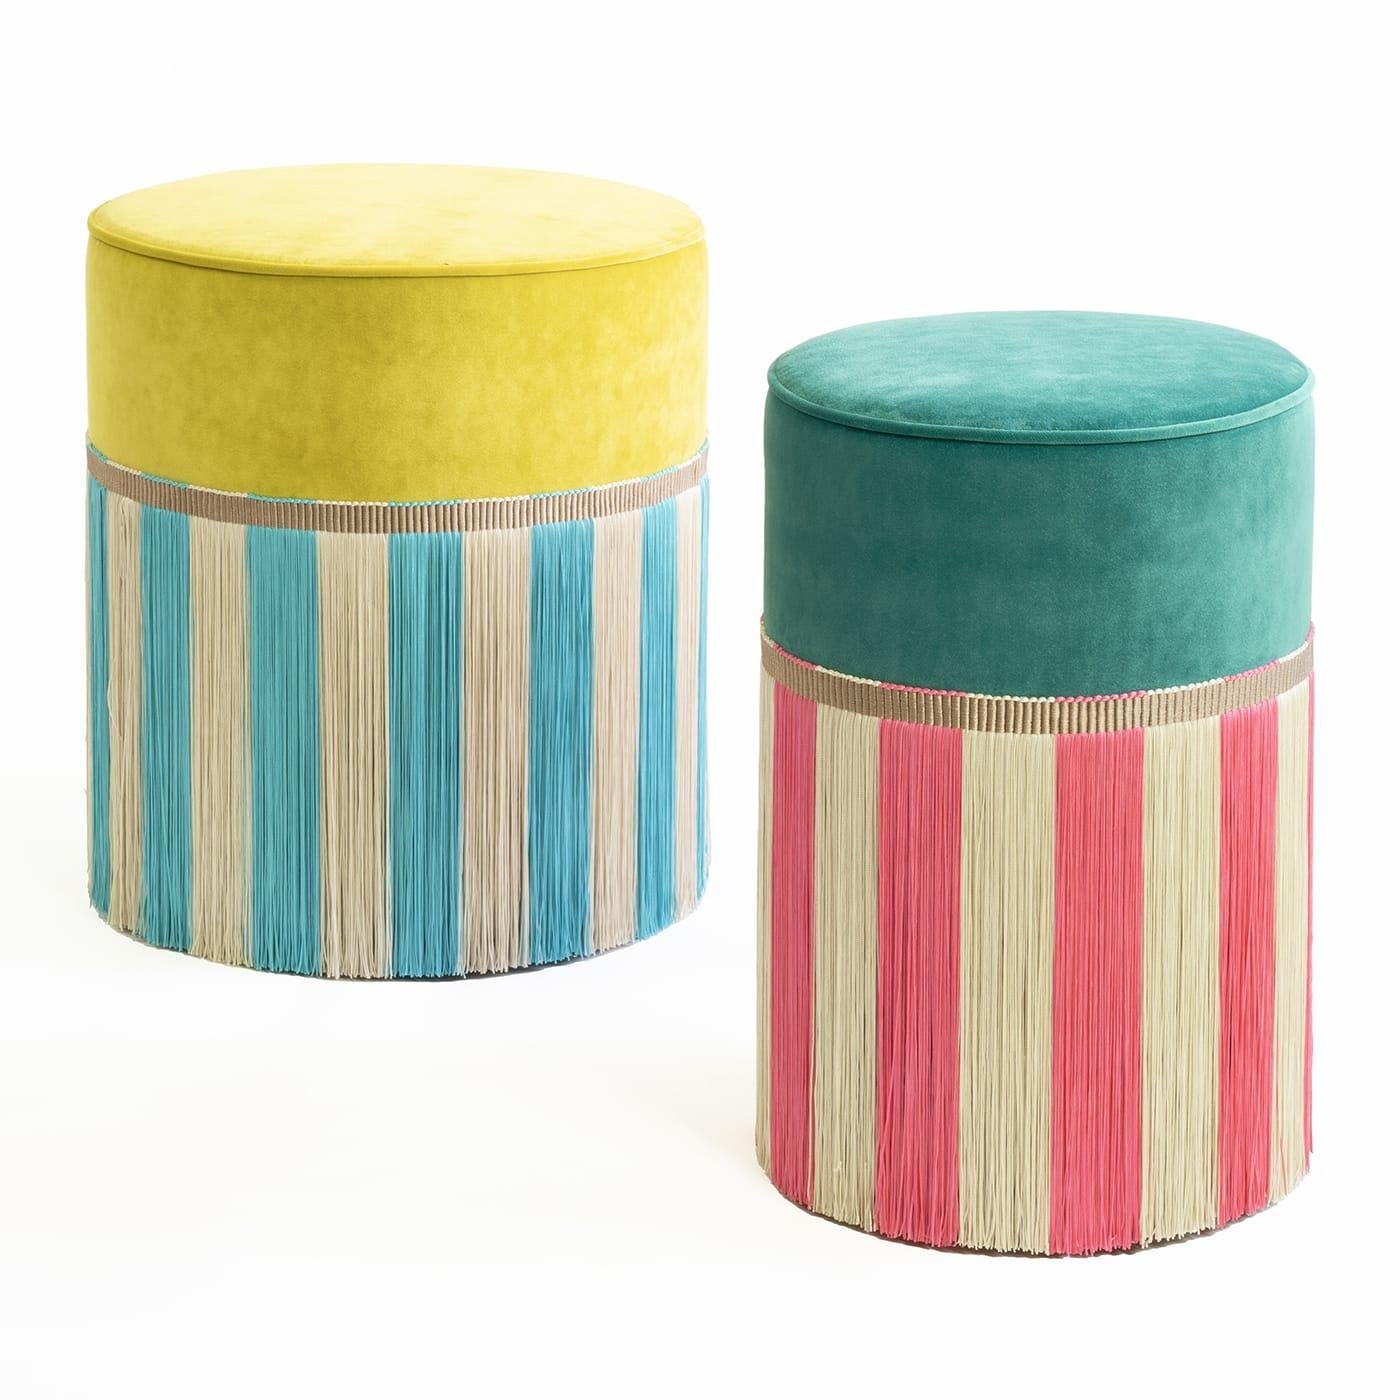 Lively and stylish, this cylindrical ottoman is a stunning piece sure to perk up otherwise dull corners of modern homes. Viscose fringes outline a striped design where the fresh combination of turquoise and white well harmonizes with the